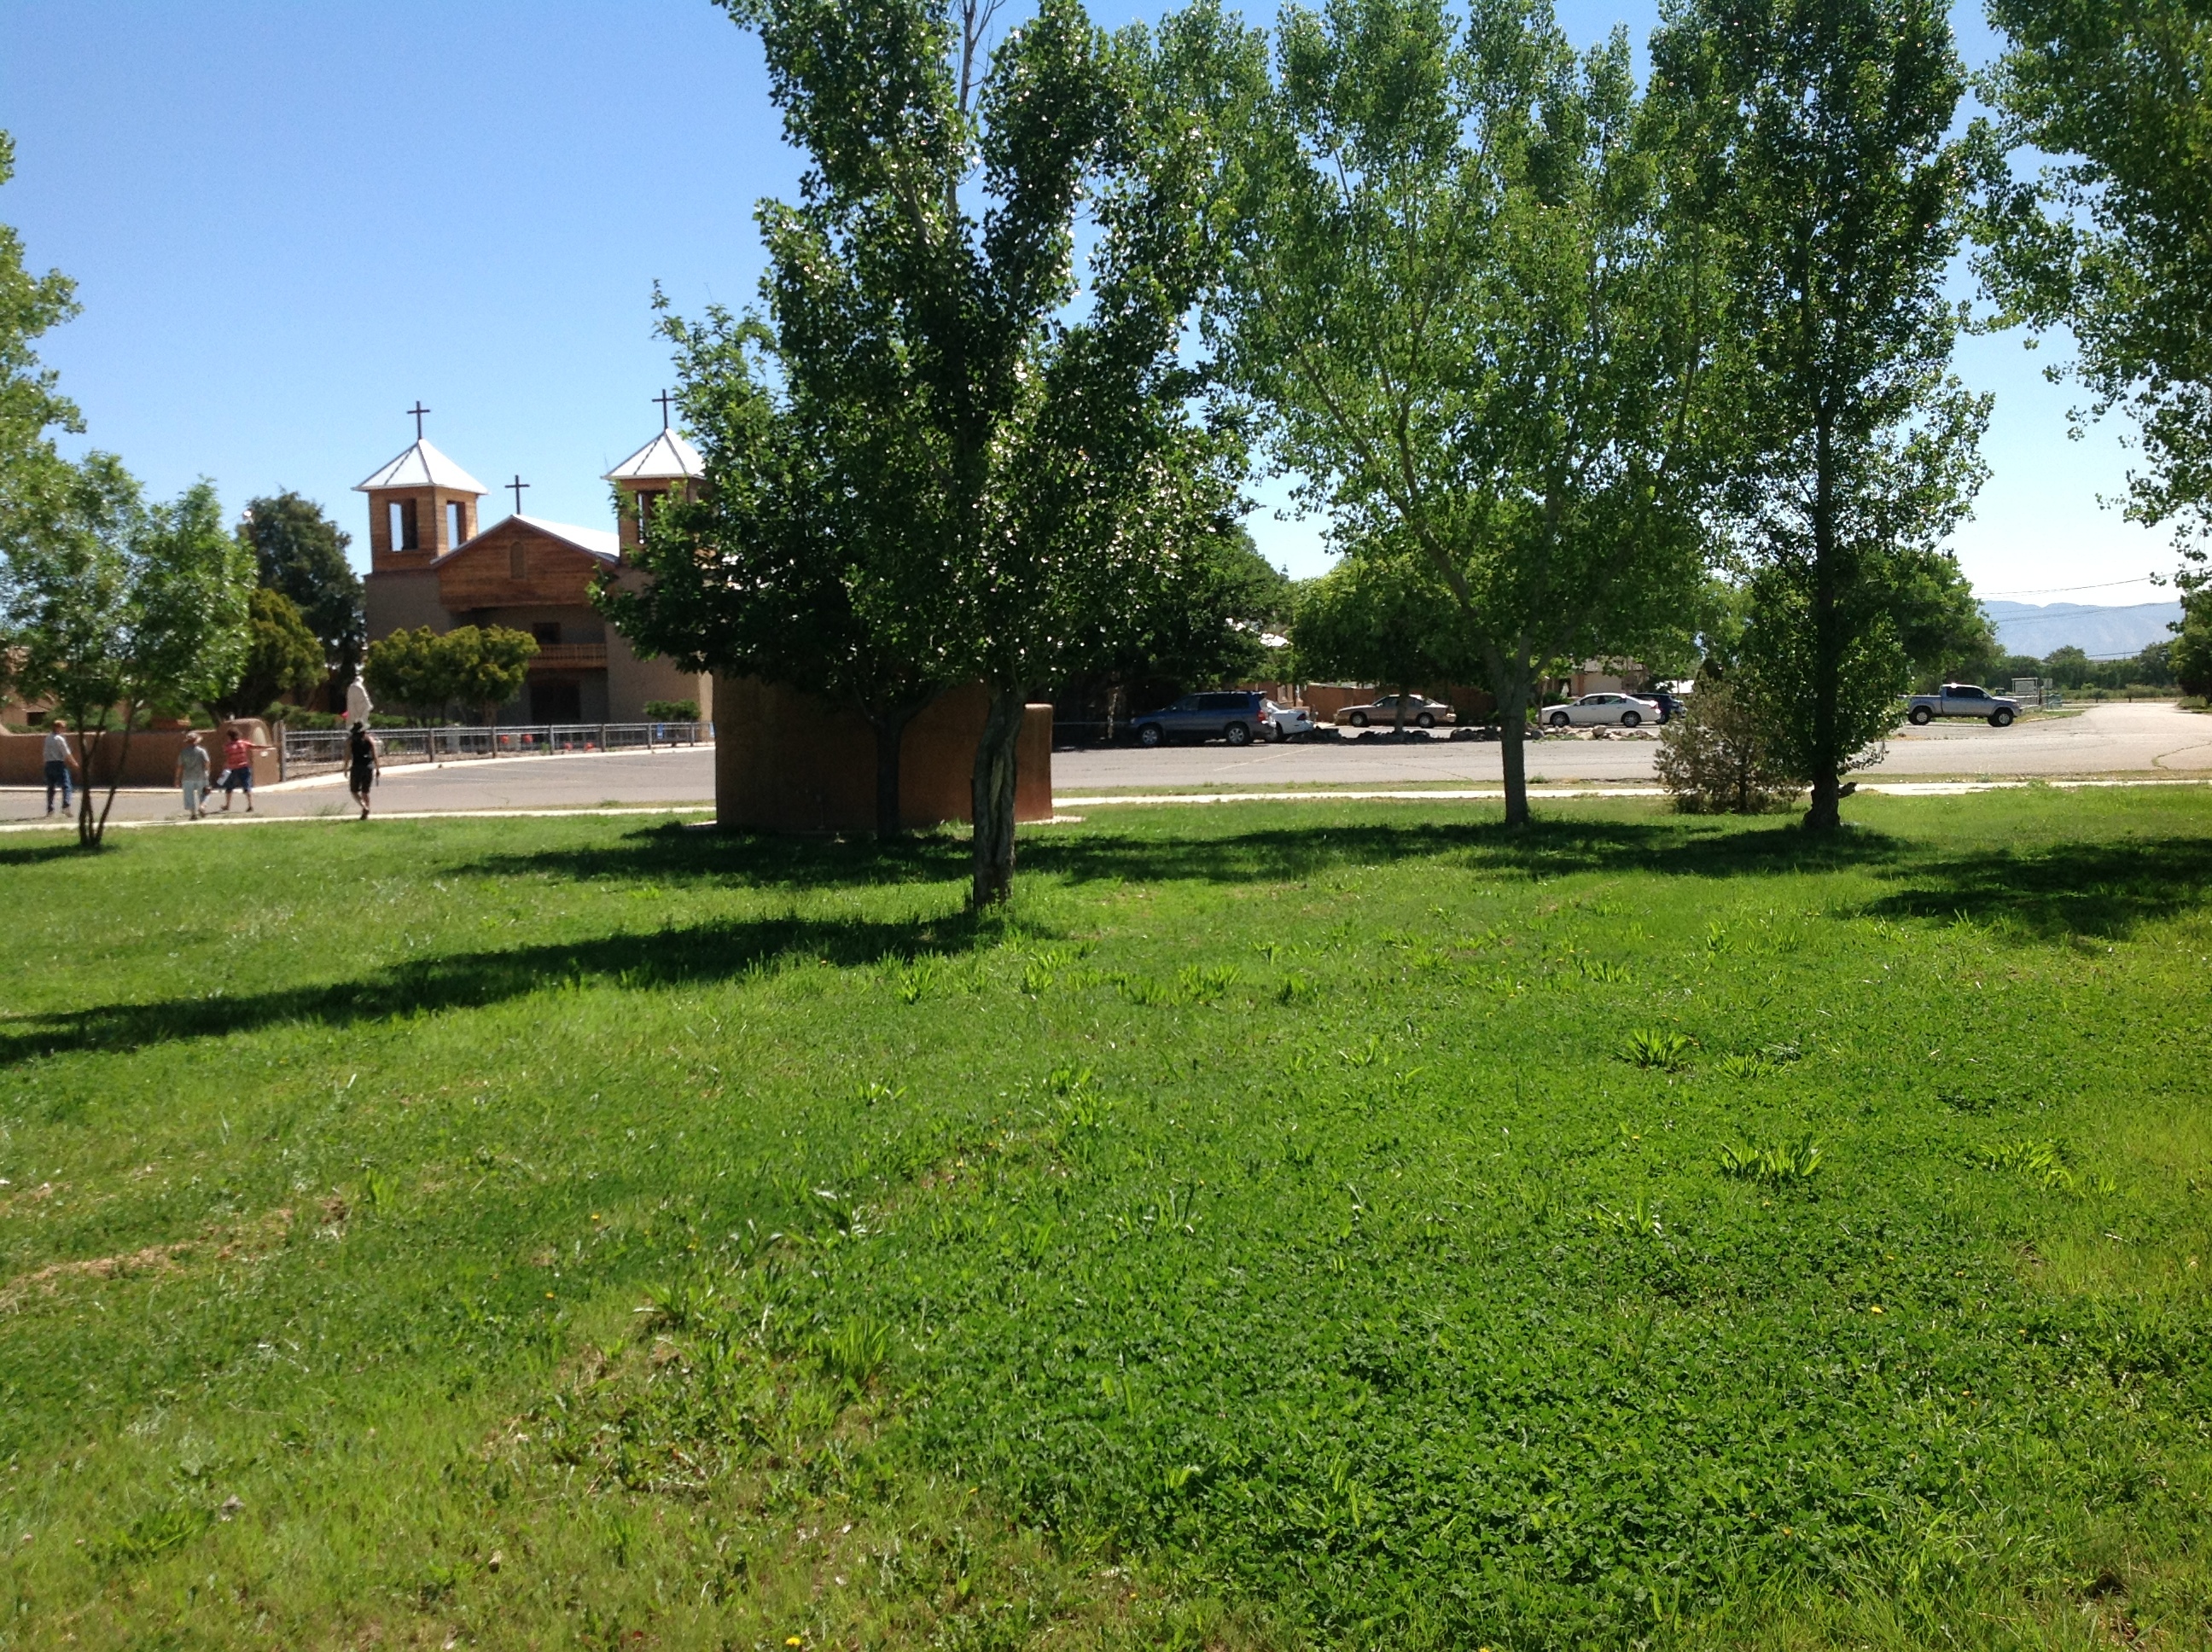 Lush green grass at the Tome Plaza in Tome, NM